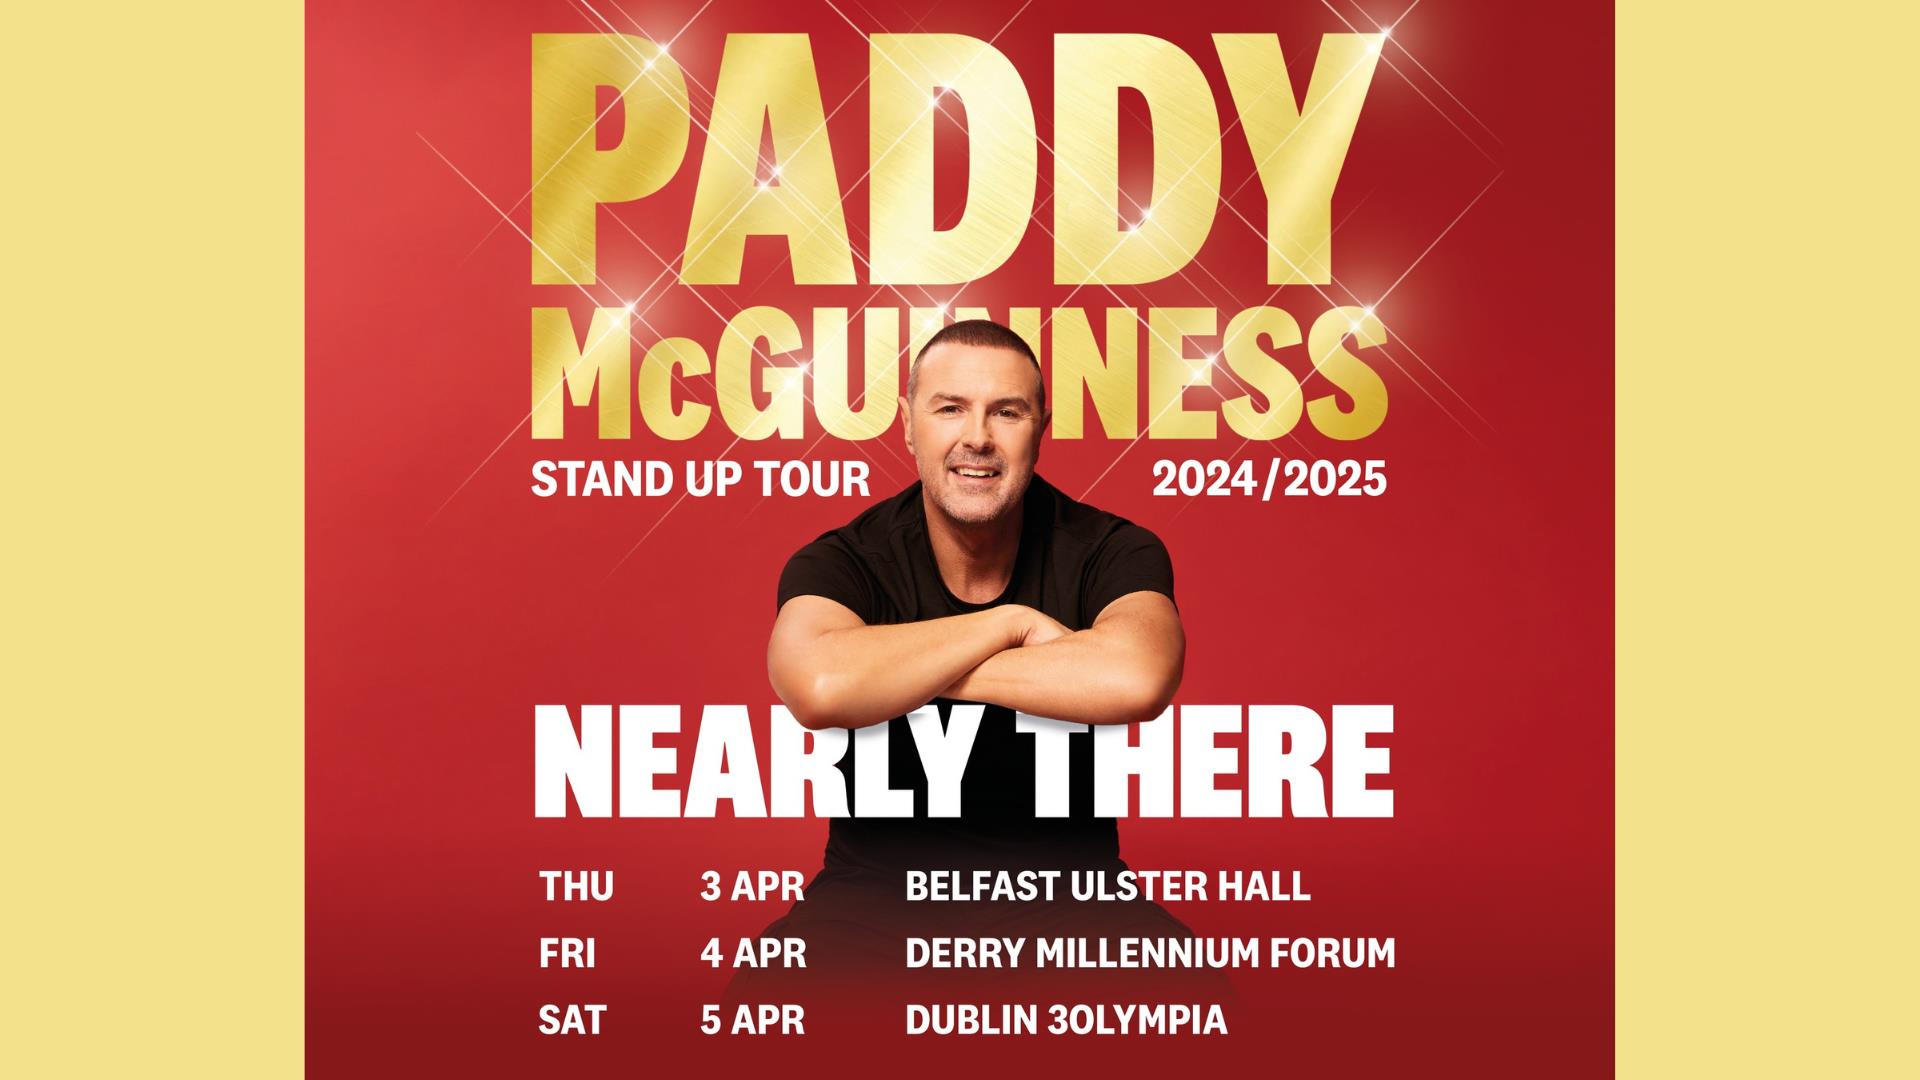 Promotional image of Paddy McGuinness with text showing the dates and locations of his tour.